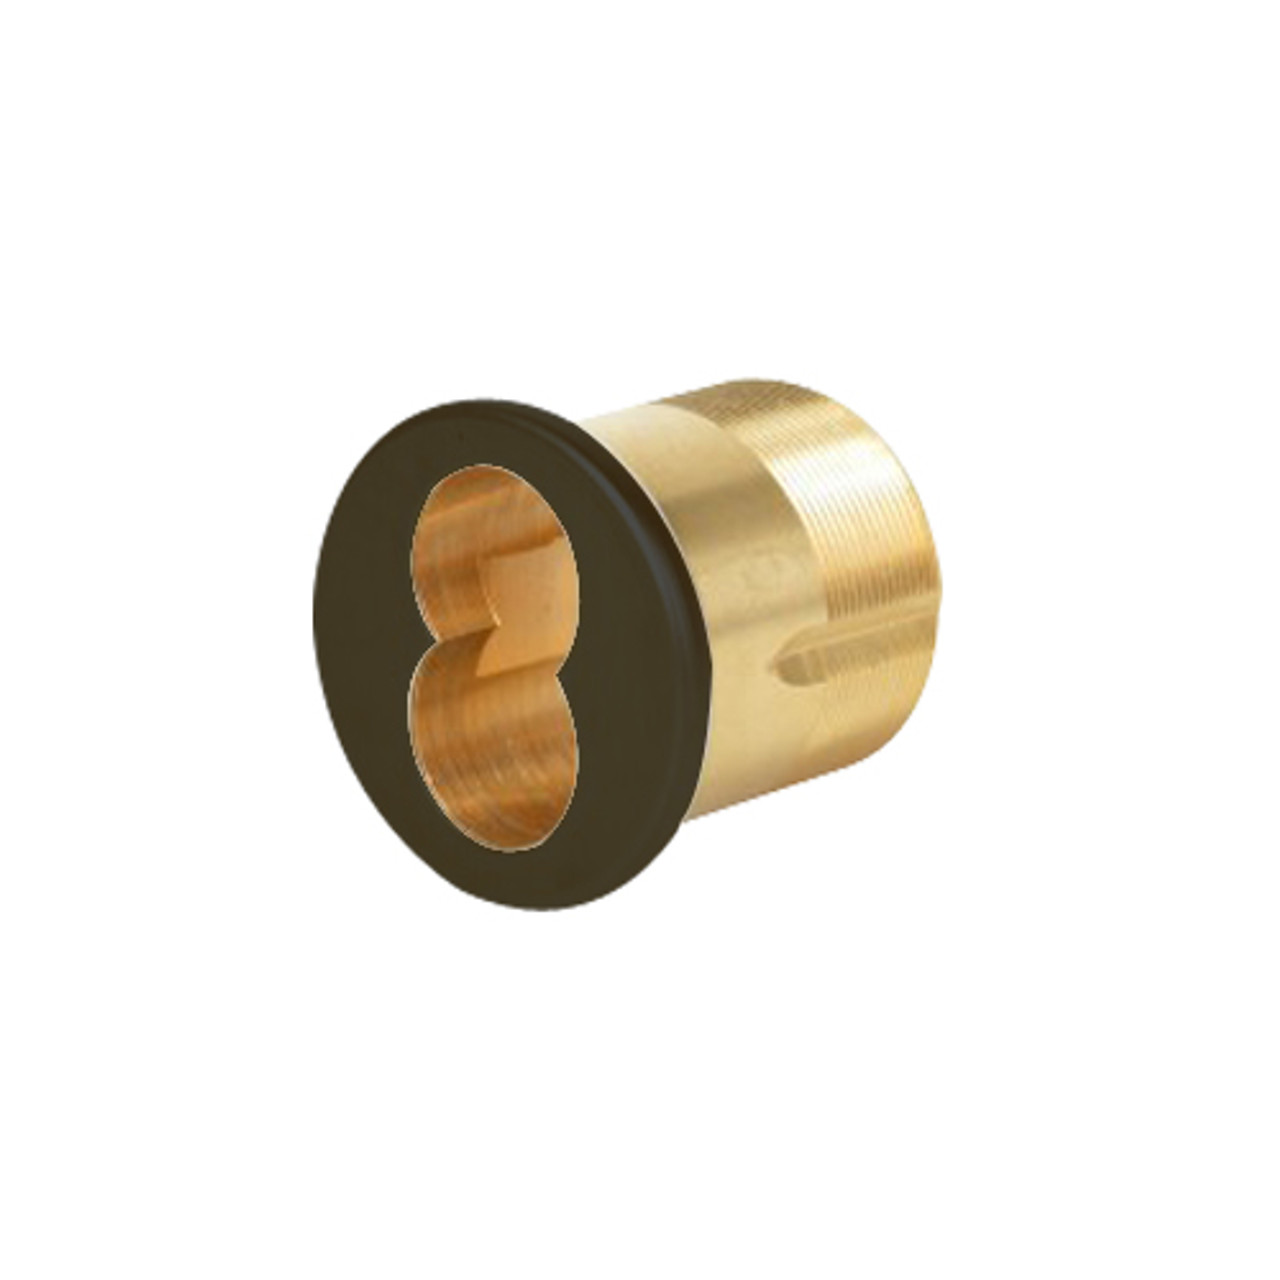 CR1070-112-A01-7-613 Corbin Mortise Interchangeable Core Housing with Cloverleaf Cam in Oil Rubbed Bronze Finish